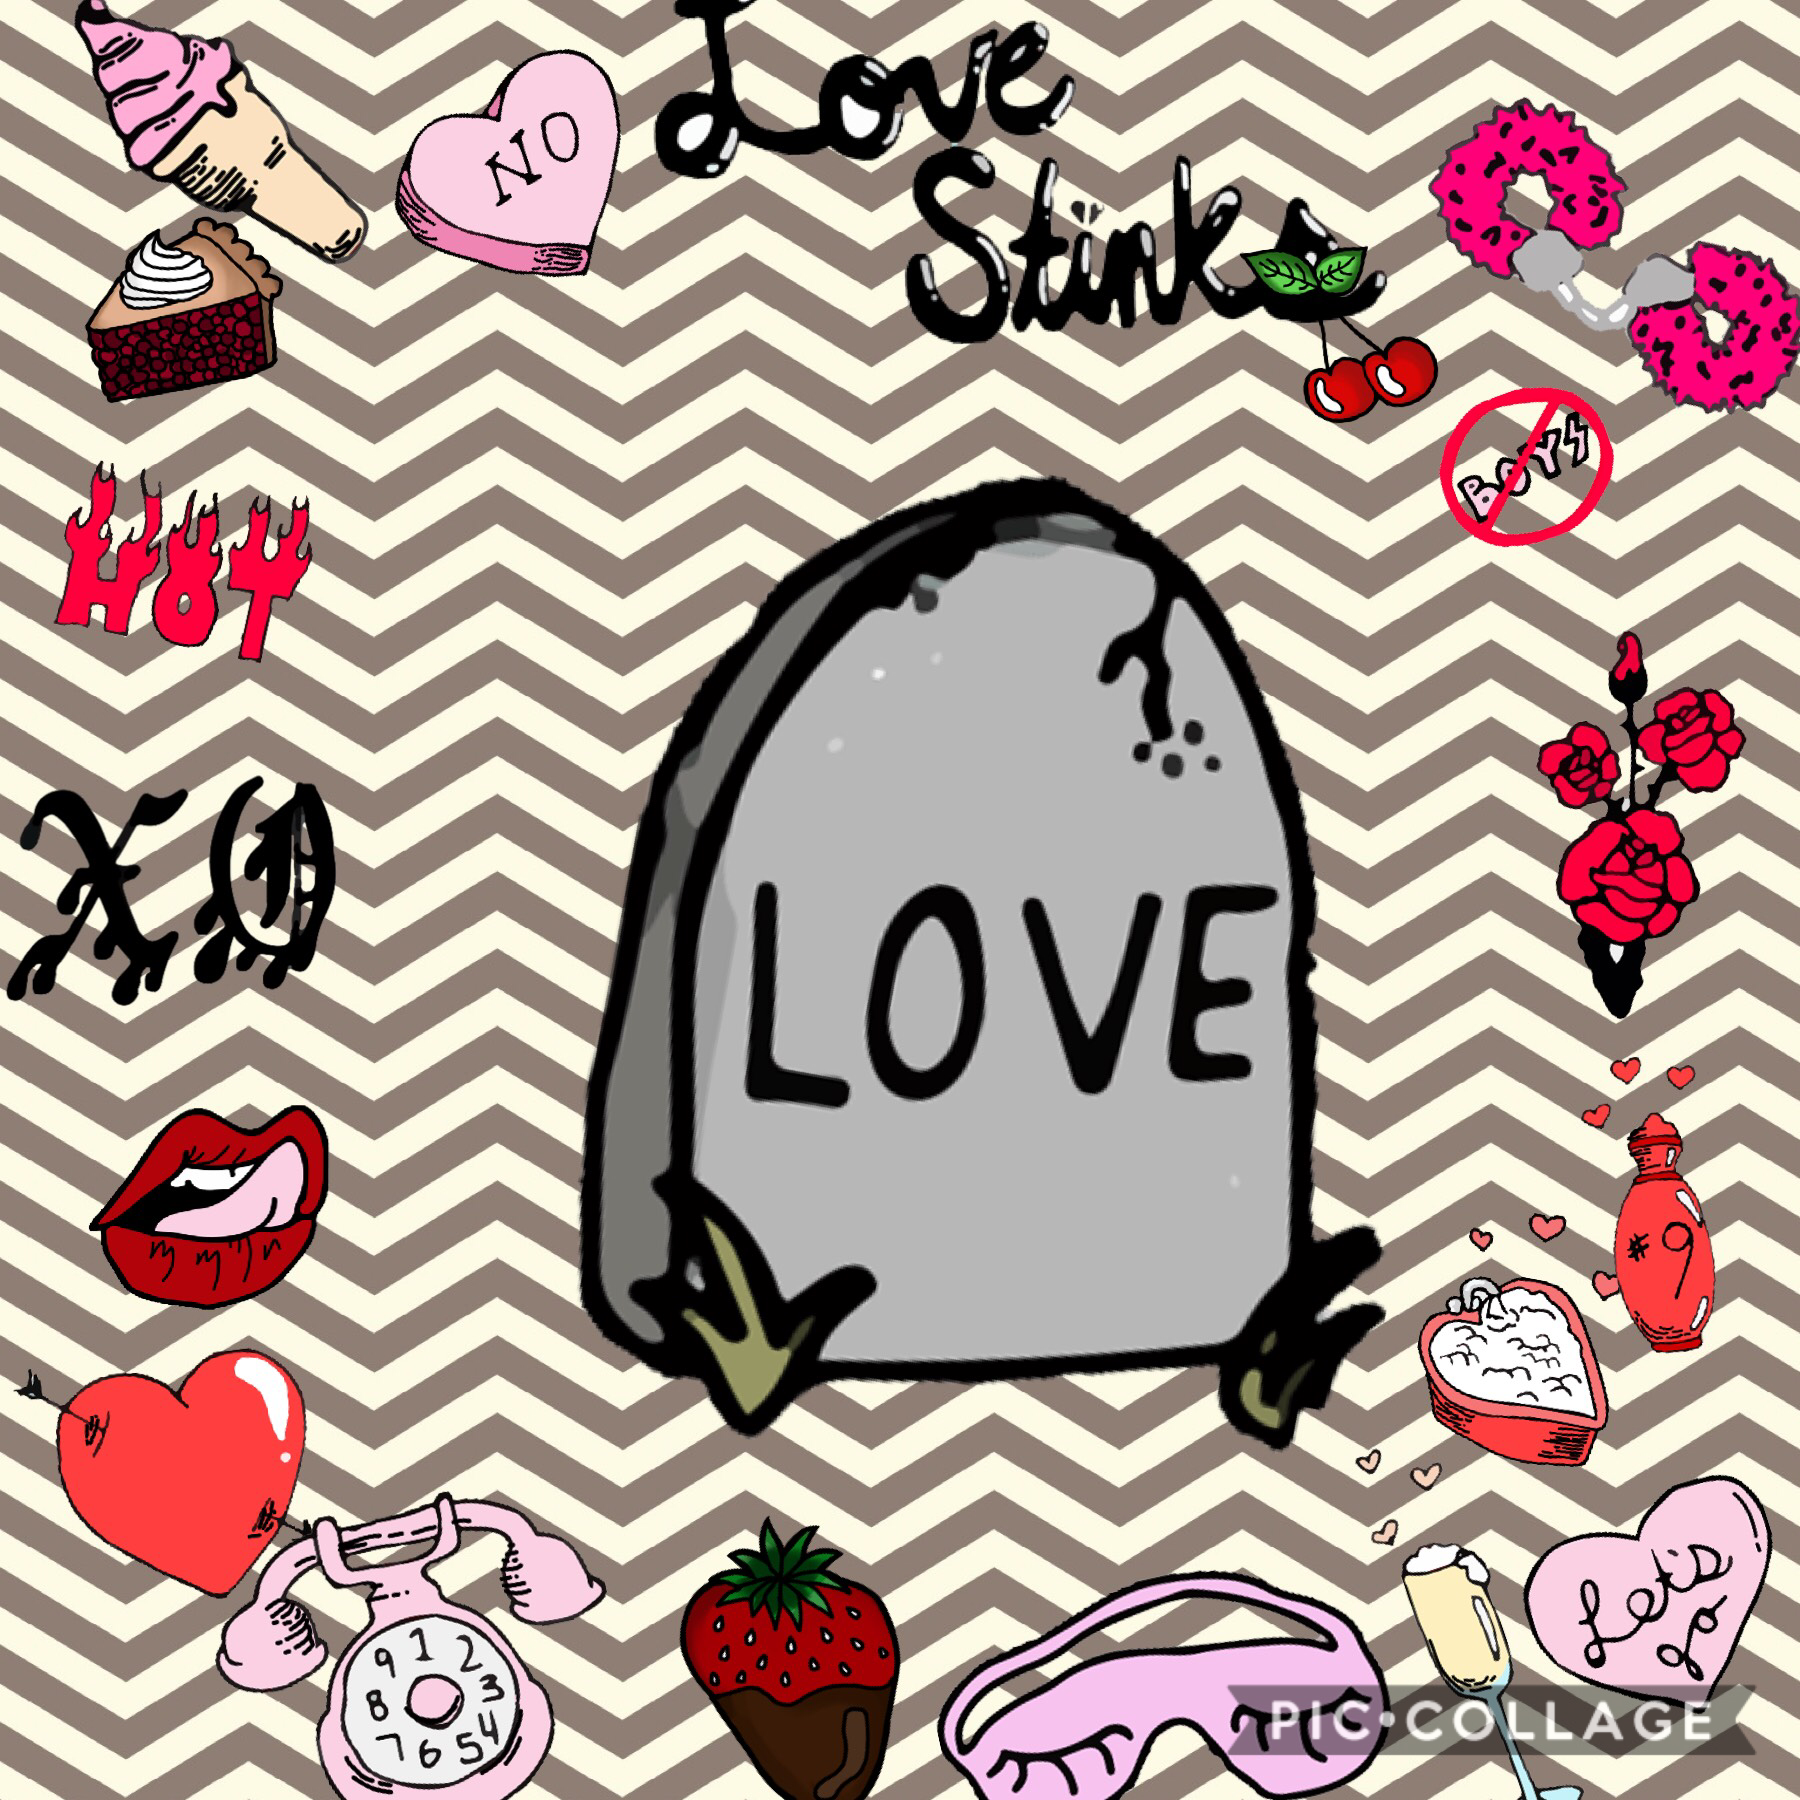 Love this sticker pack must try 